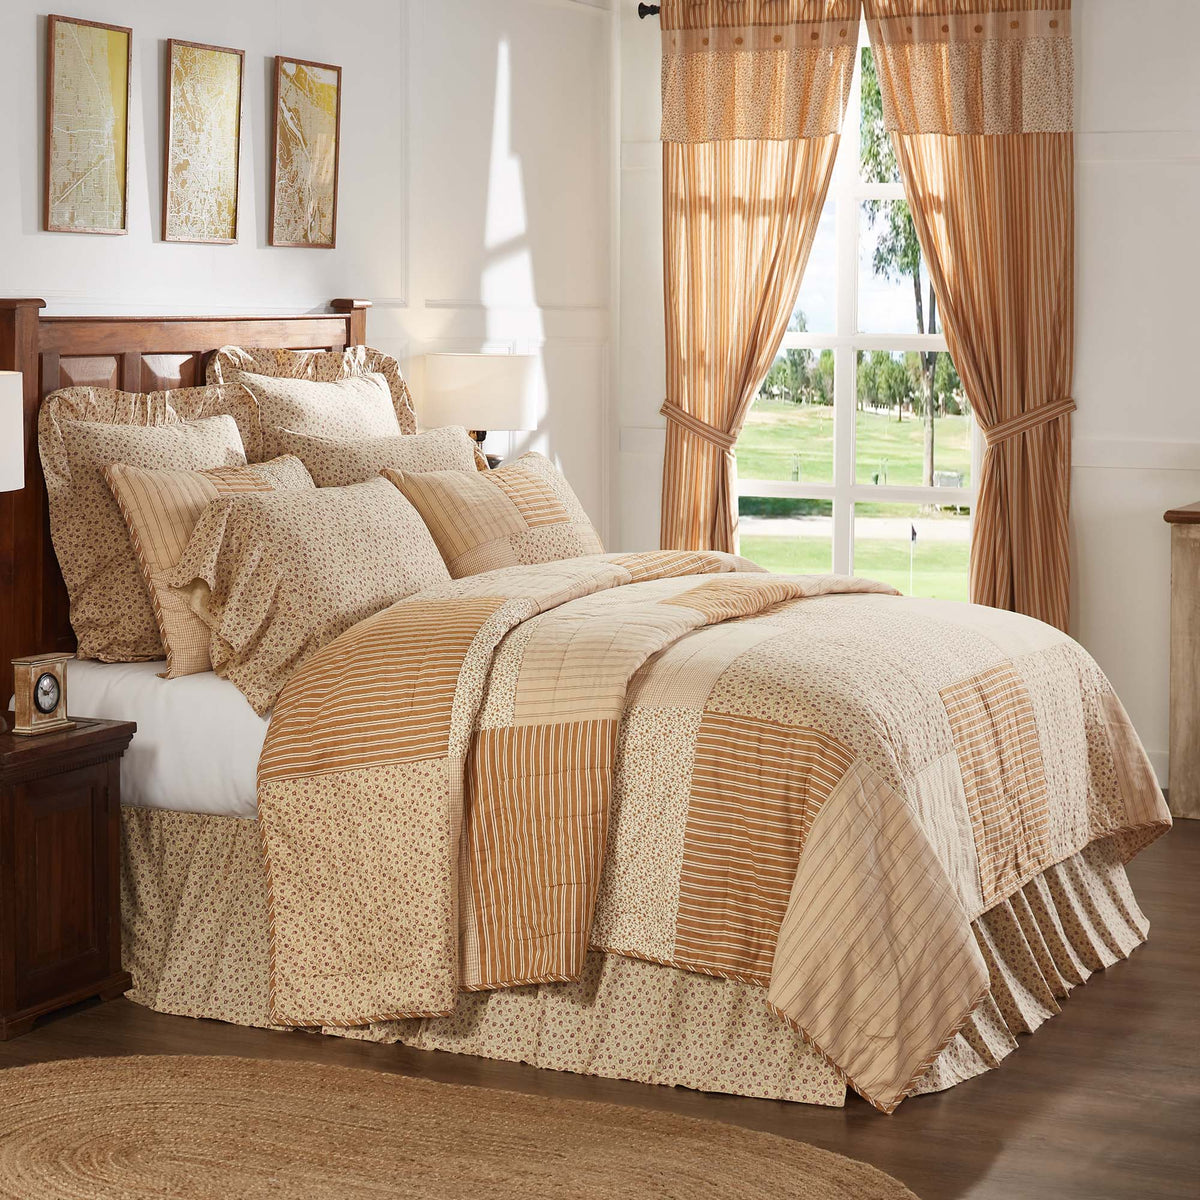 April & Olive Camilia Luxury King Quilt 120Wx105L By VHC Brands